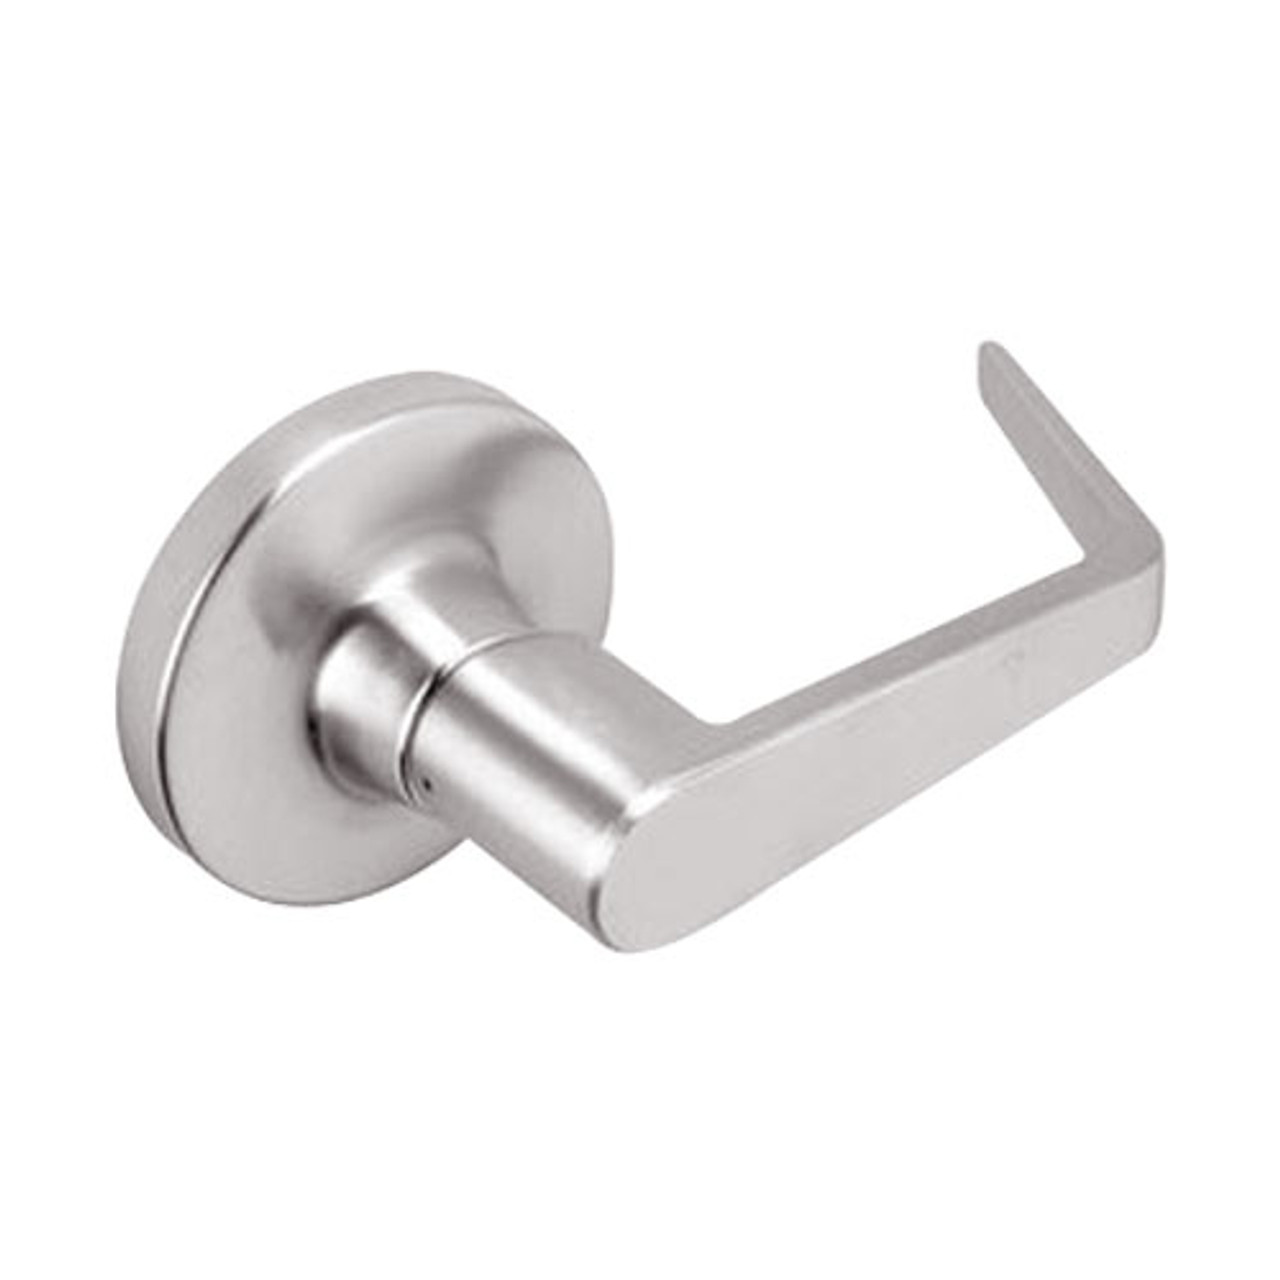 MA161-DG-630 Falcon Mortise Locks MA Series Exit/Connecting with DG Lever in Satin Stainless Finish